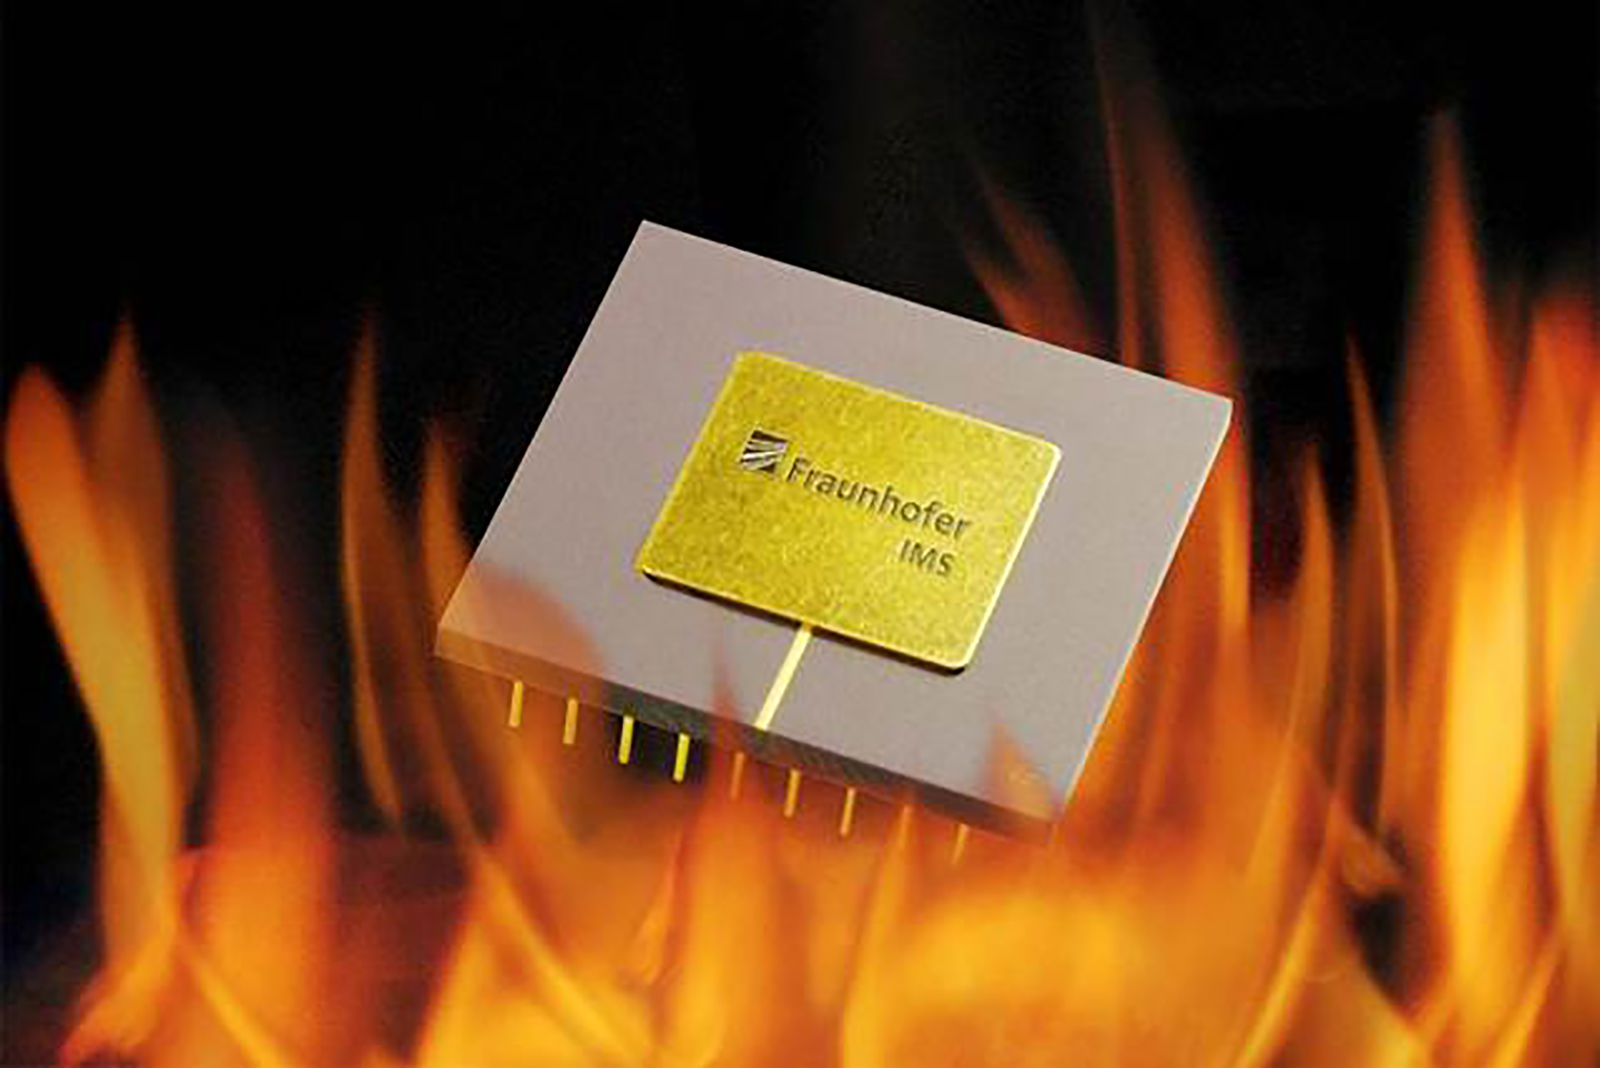 The capacitor withstands temperatures of up to 300 degrees Celsius.